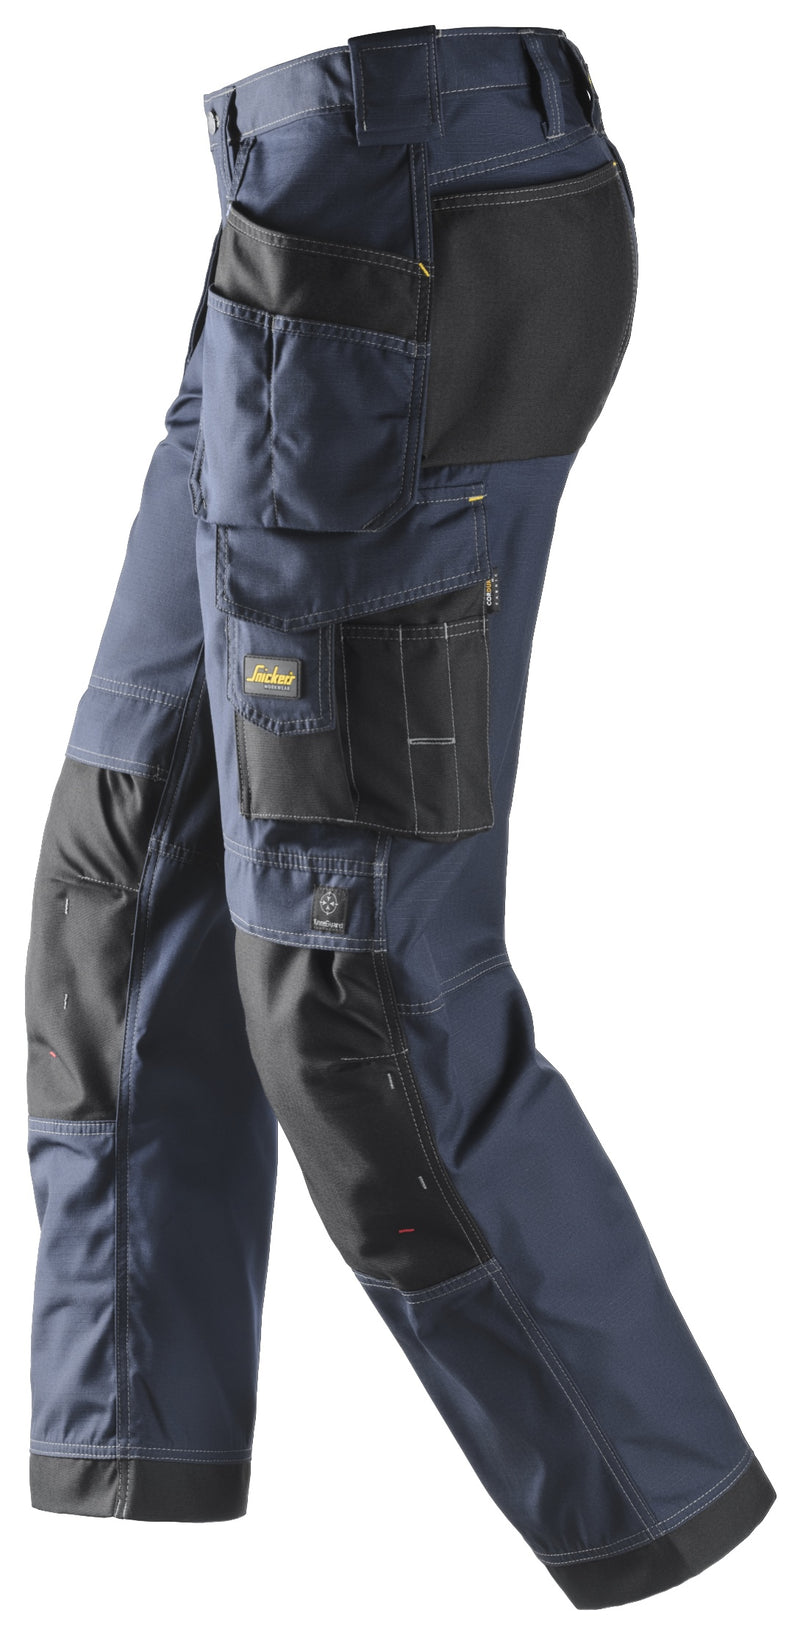 Snickers Craftsman Holster Pockets Trousers Rip-Stop, Navy/Black, Size 116